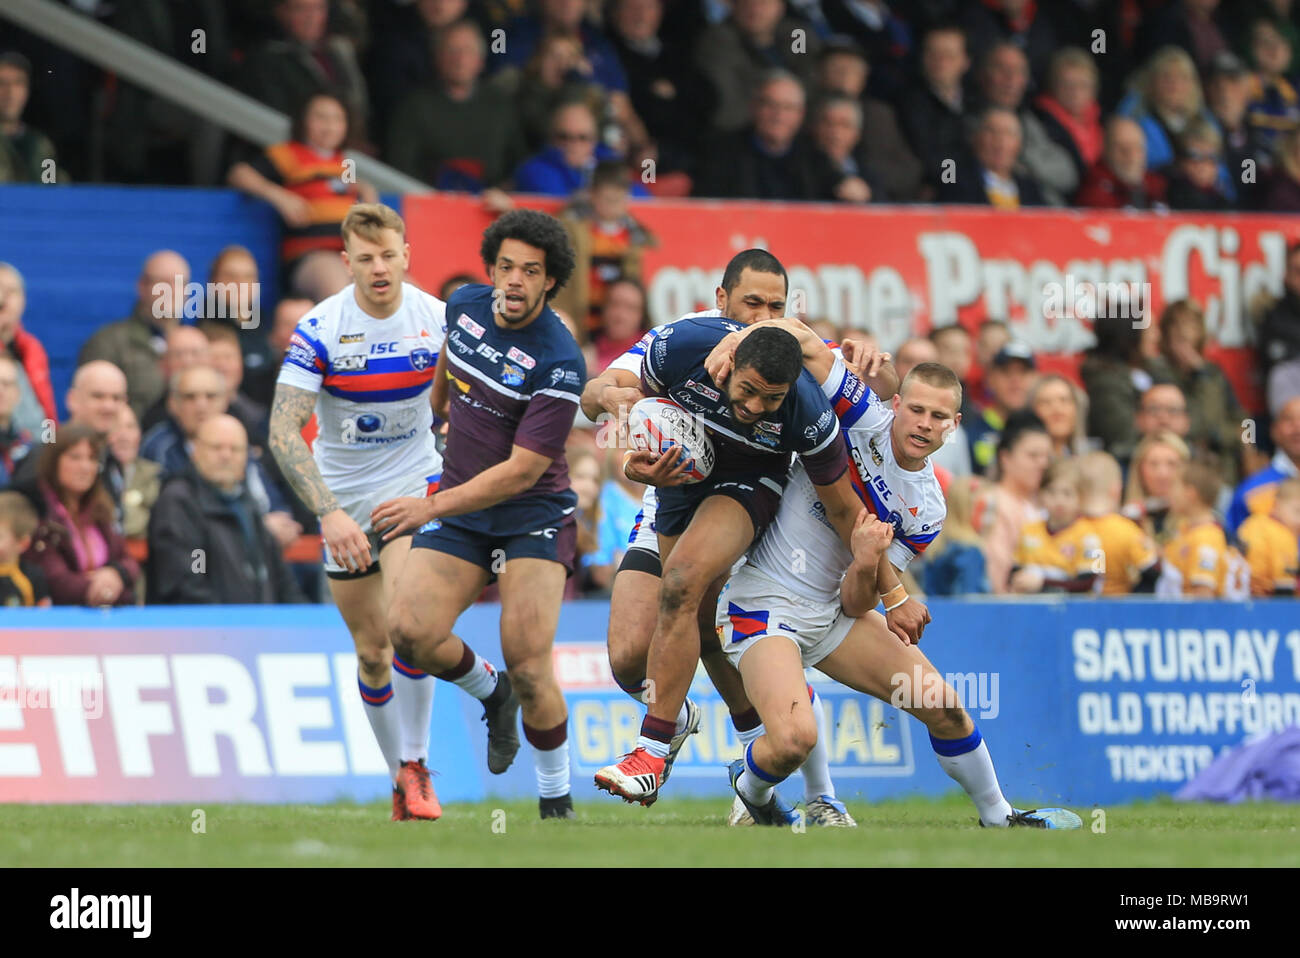 Wakefield, UK. 8th April 2018, Beaumont Legal Stadium, Wakefield, England; Betfred Super League rugby, Wakefield Trinity v Leeds Rhinos; Kallum Watkins of Leeds Rhinos is tackled by Jacob Miller of Wakefield Trinity Credit: News Images/Alamy Live News Stock Photo